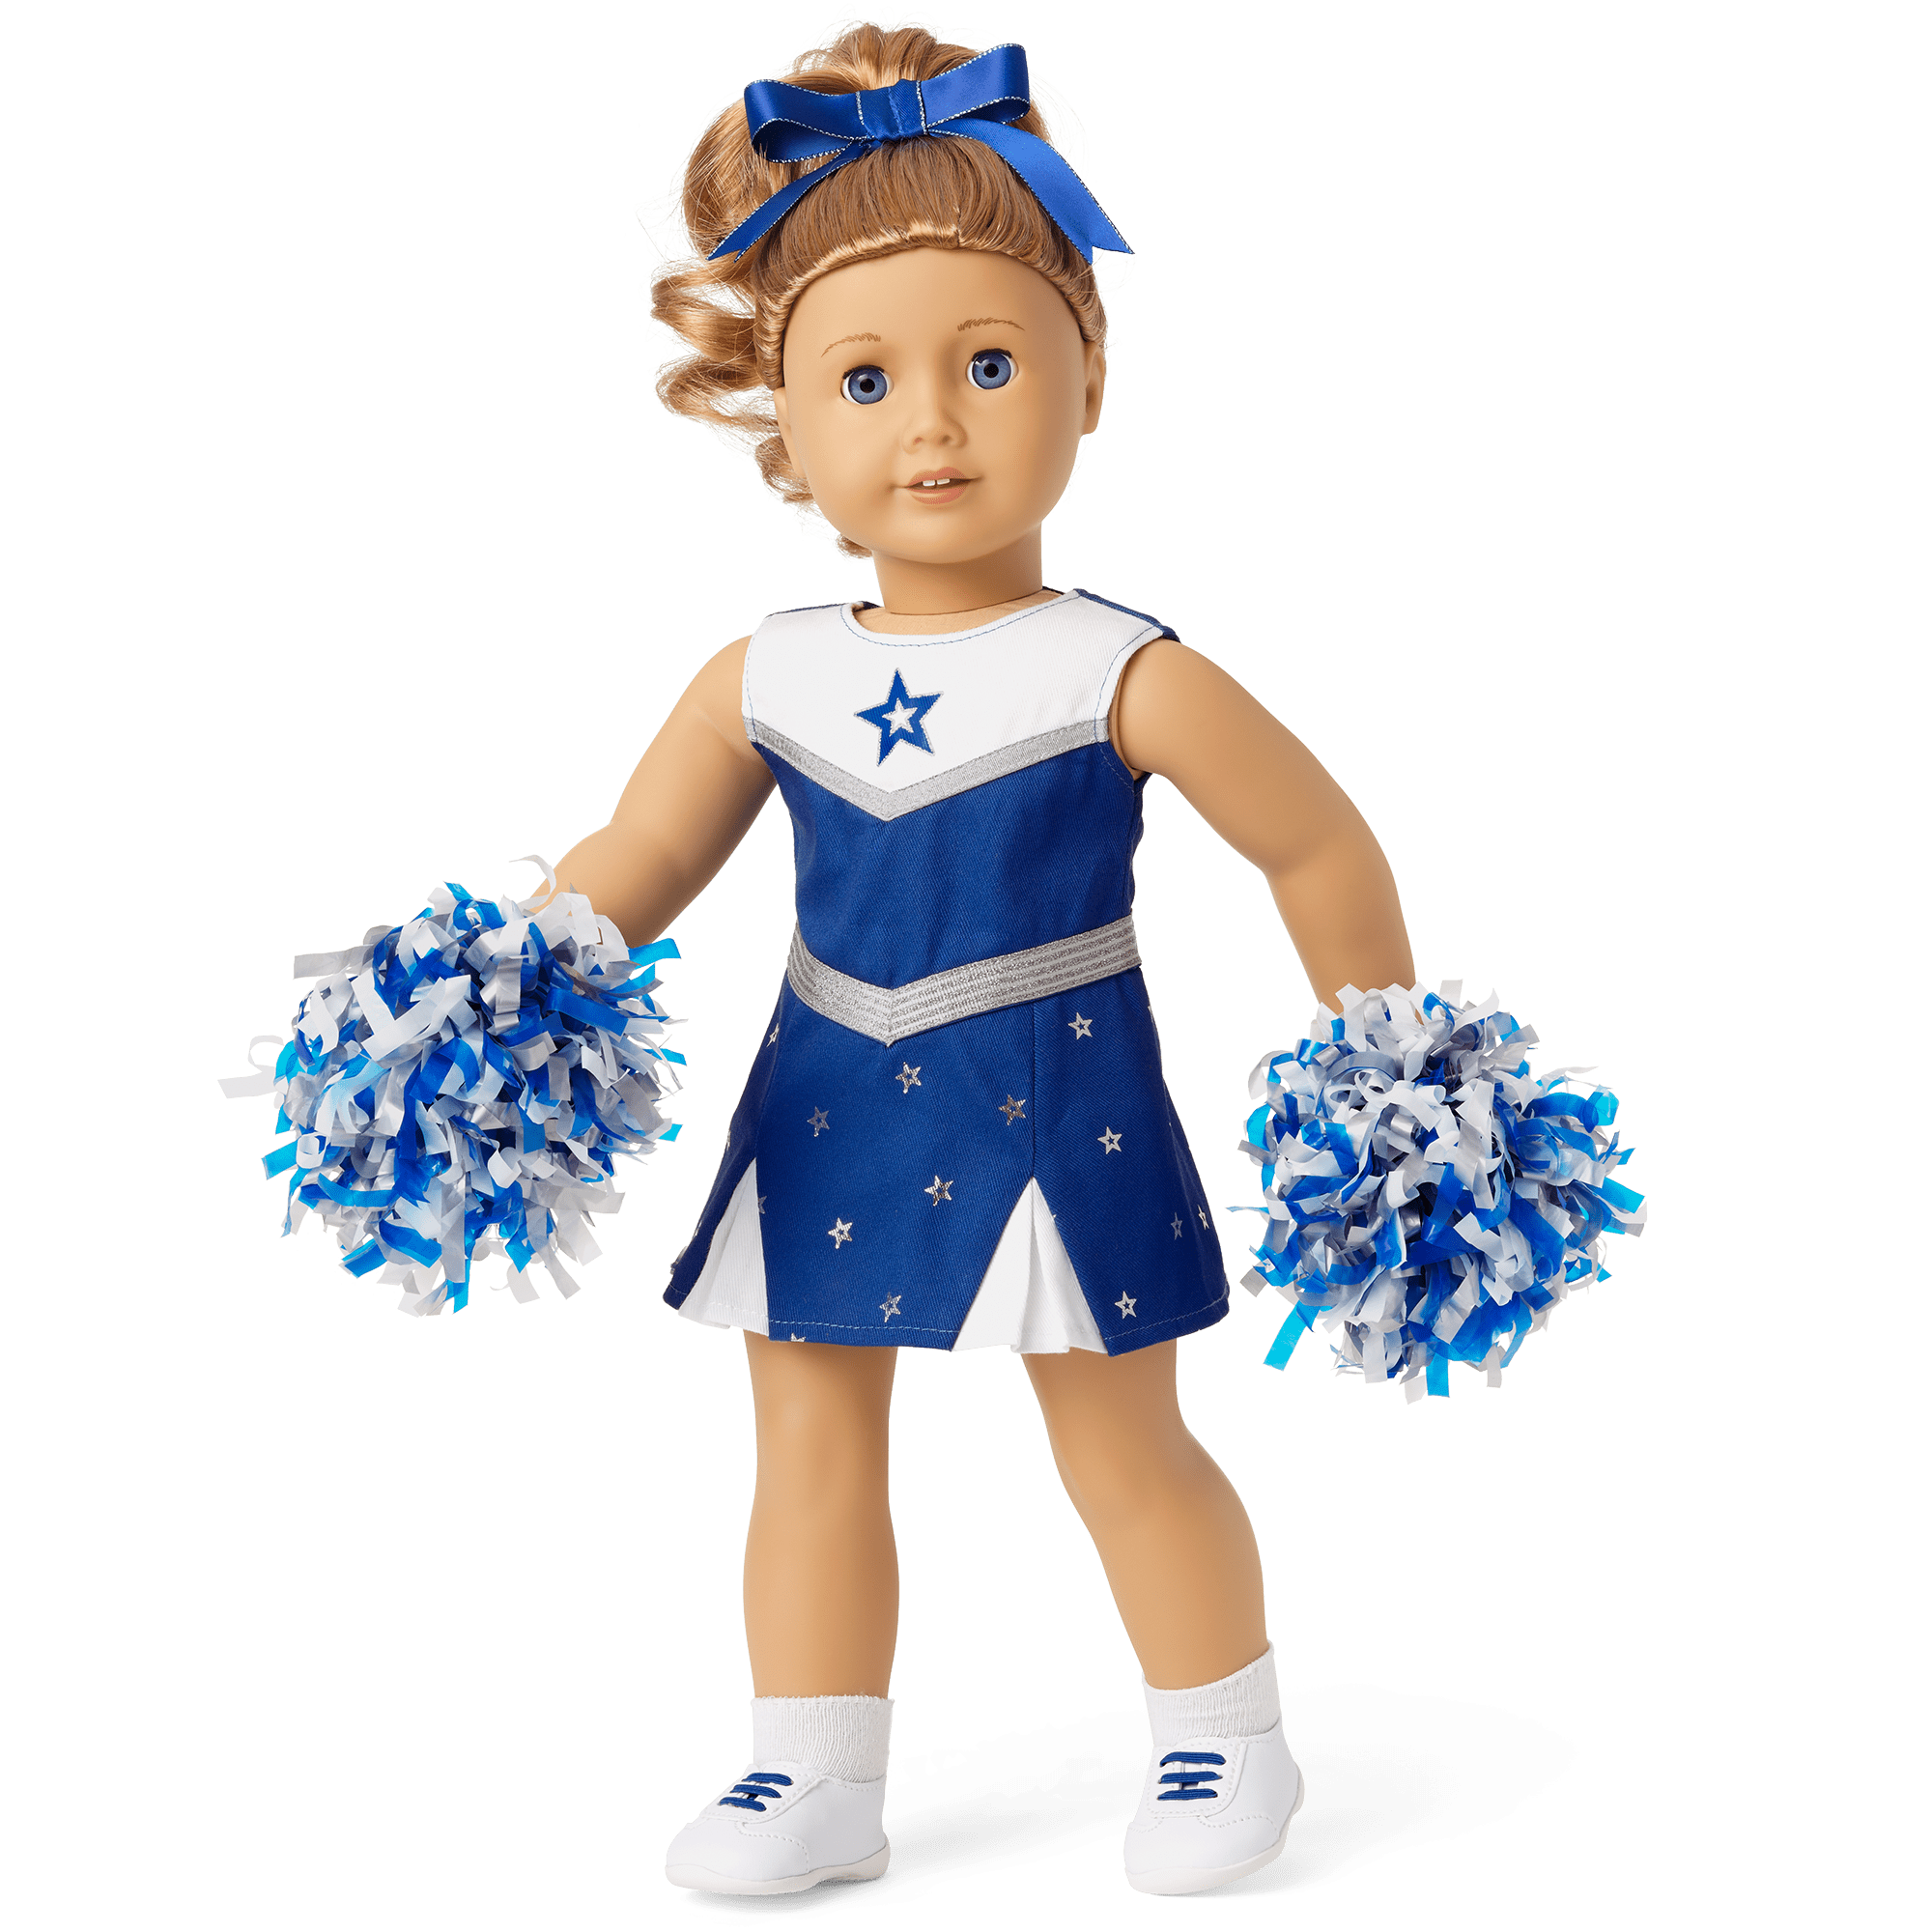 Dress Along Dolly Basketball Uniform Outfit for American Girl & 18 Dolls (8 Piece Set) - Includes Doll Clothes & Accessories 